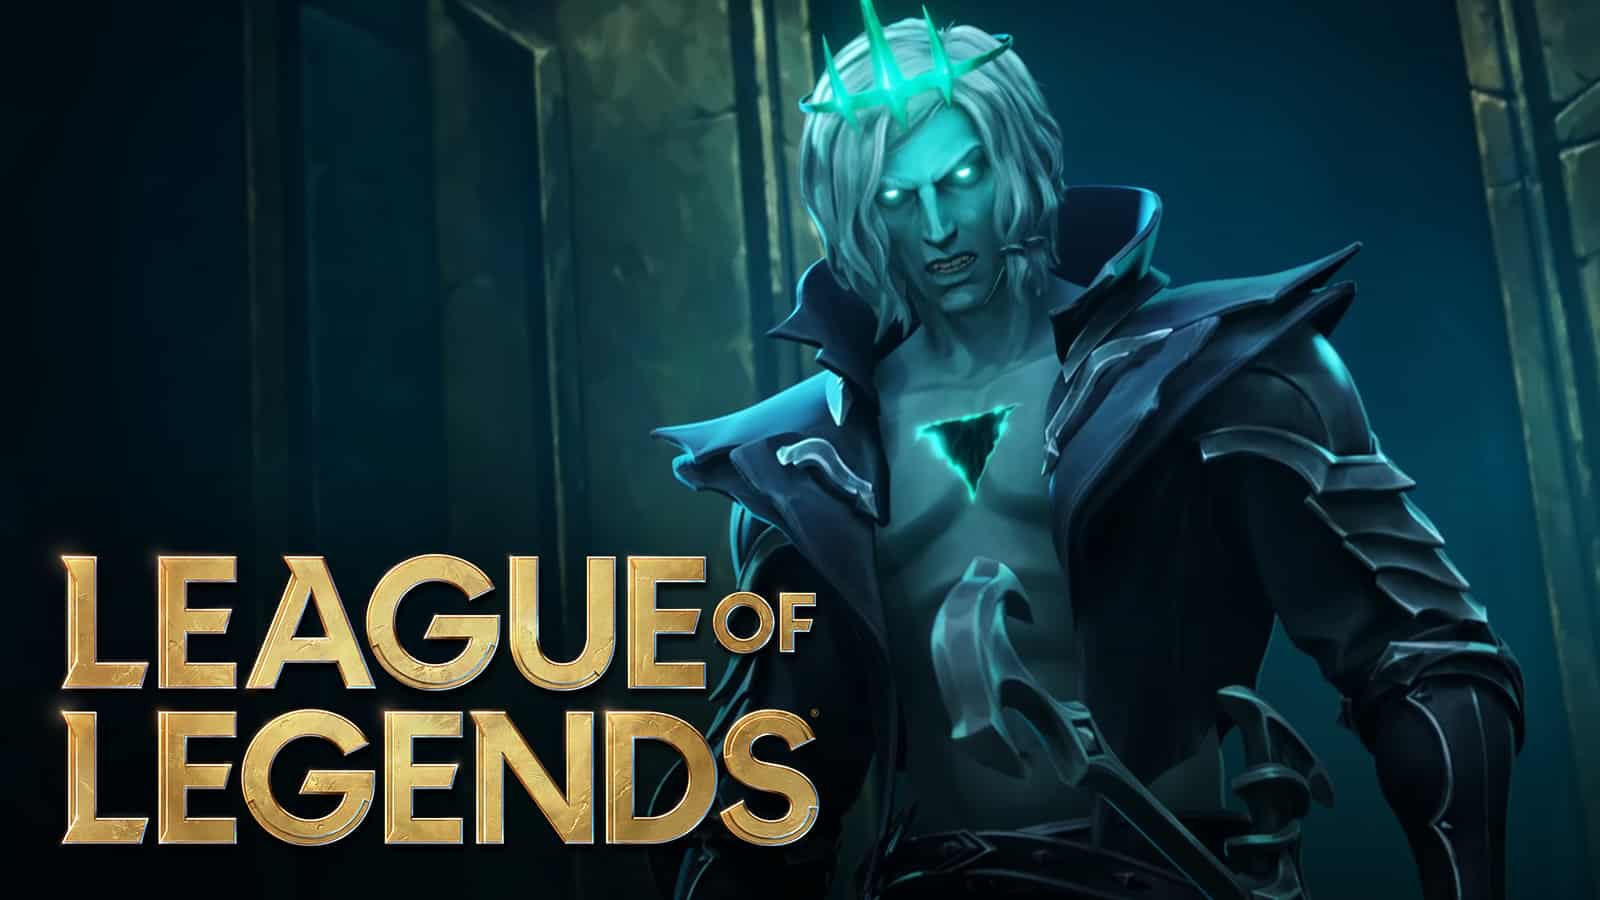 Viego the Ruined King standing next to League of Legends patch 11.17 nerfs.